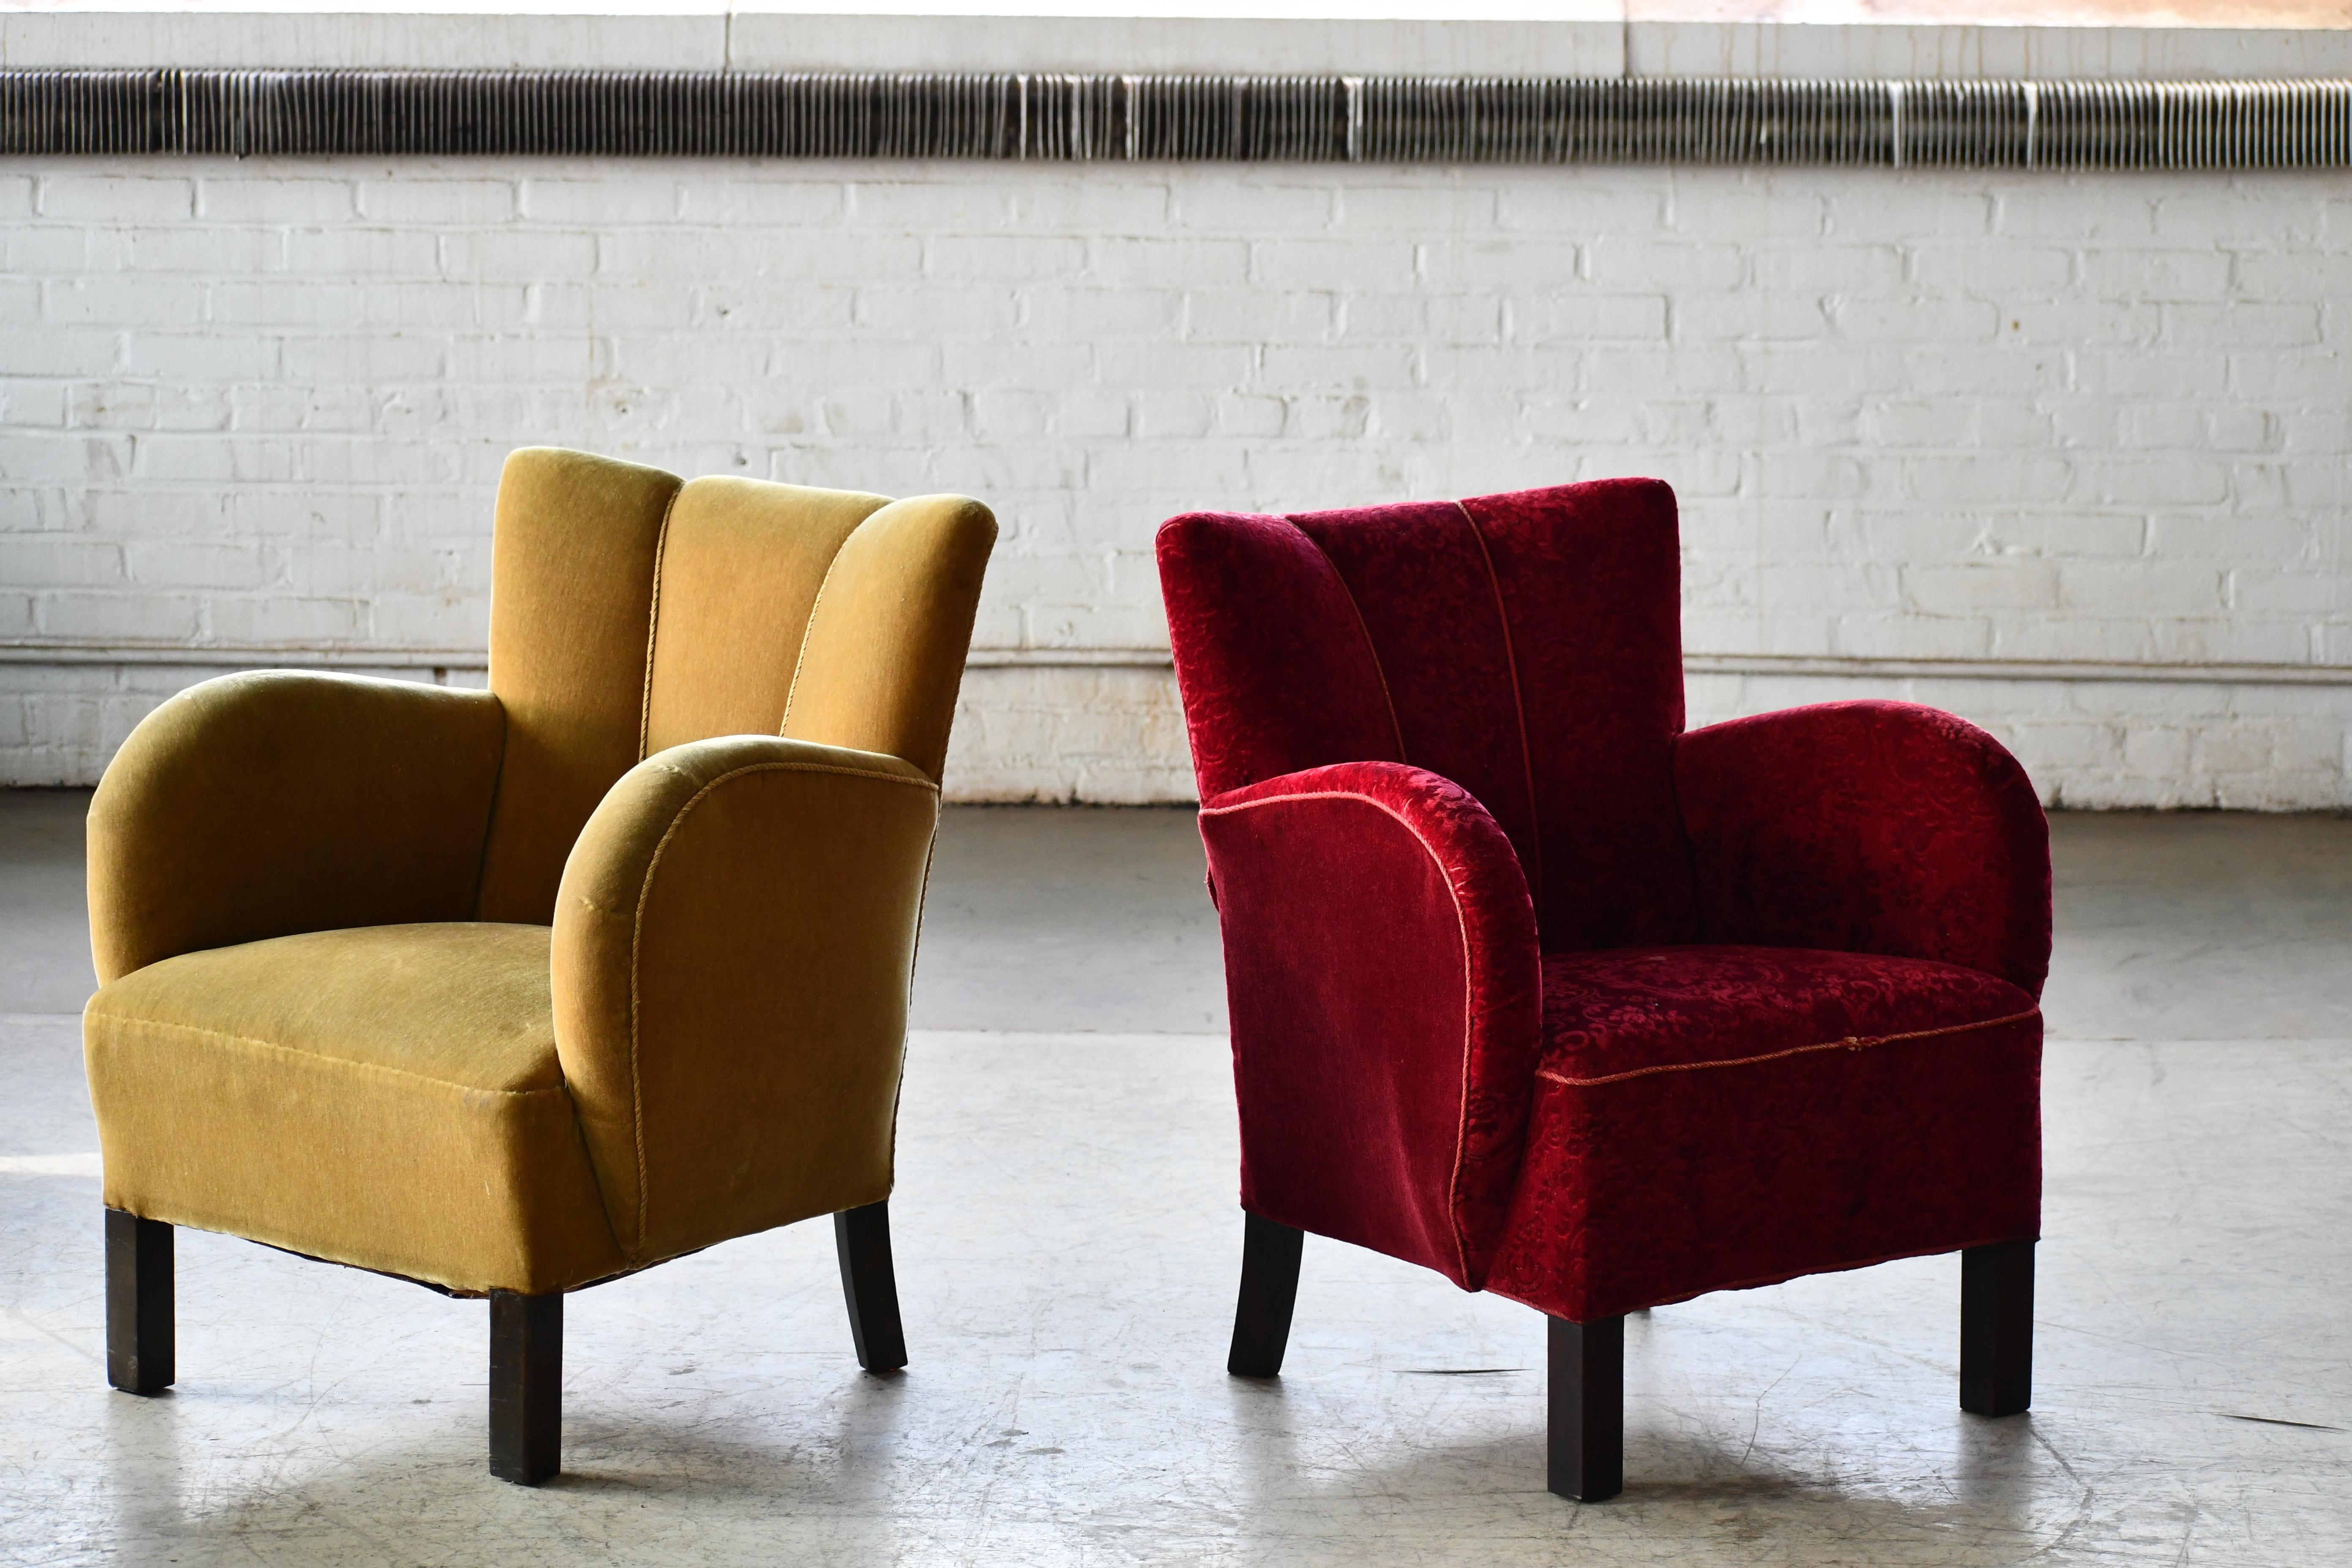 Danish Early Midcentury or Art Deco Low Lounge Chairs 1930-40s  For Sale 2